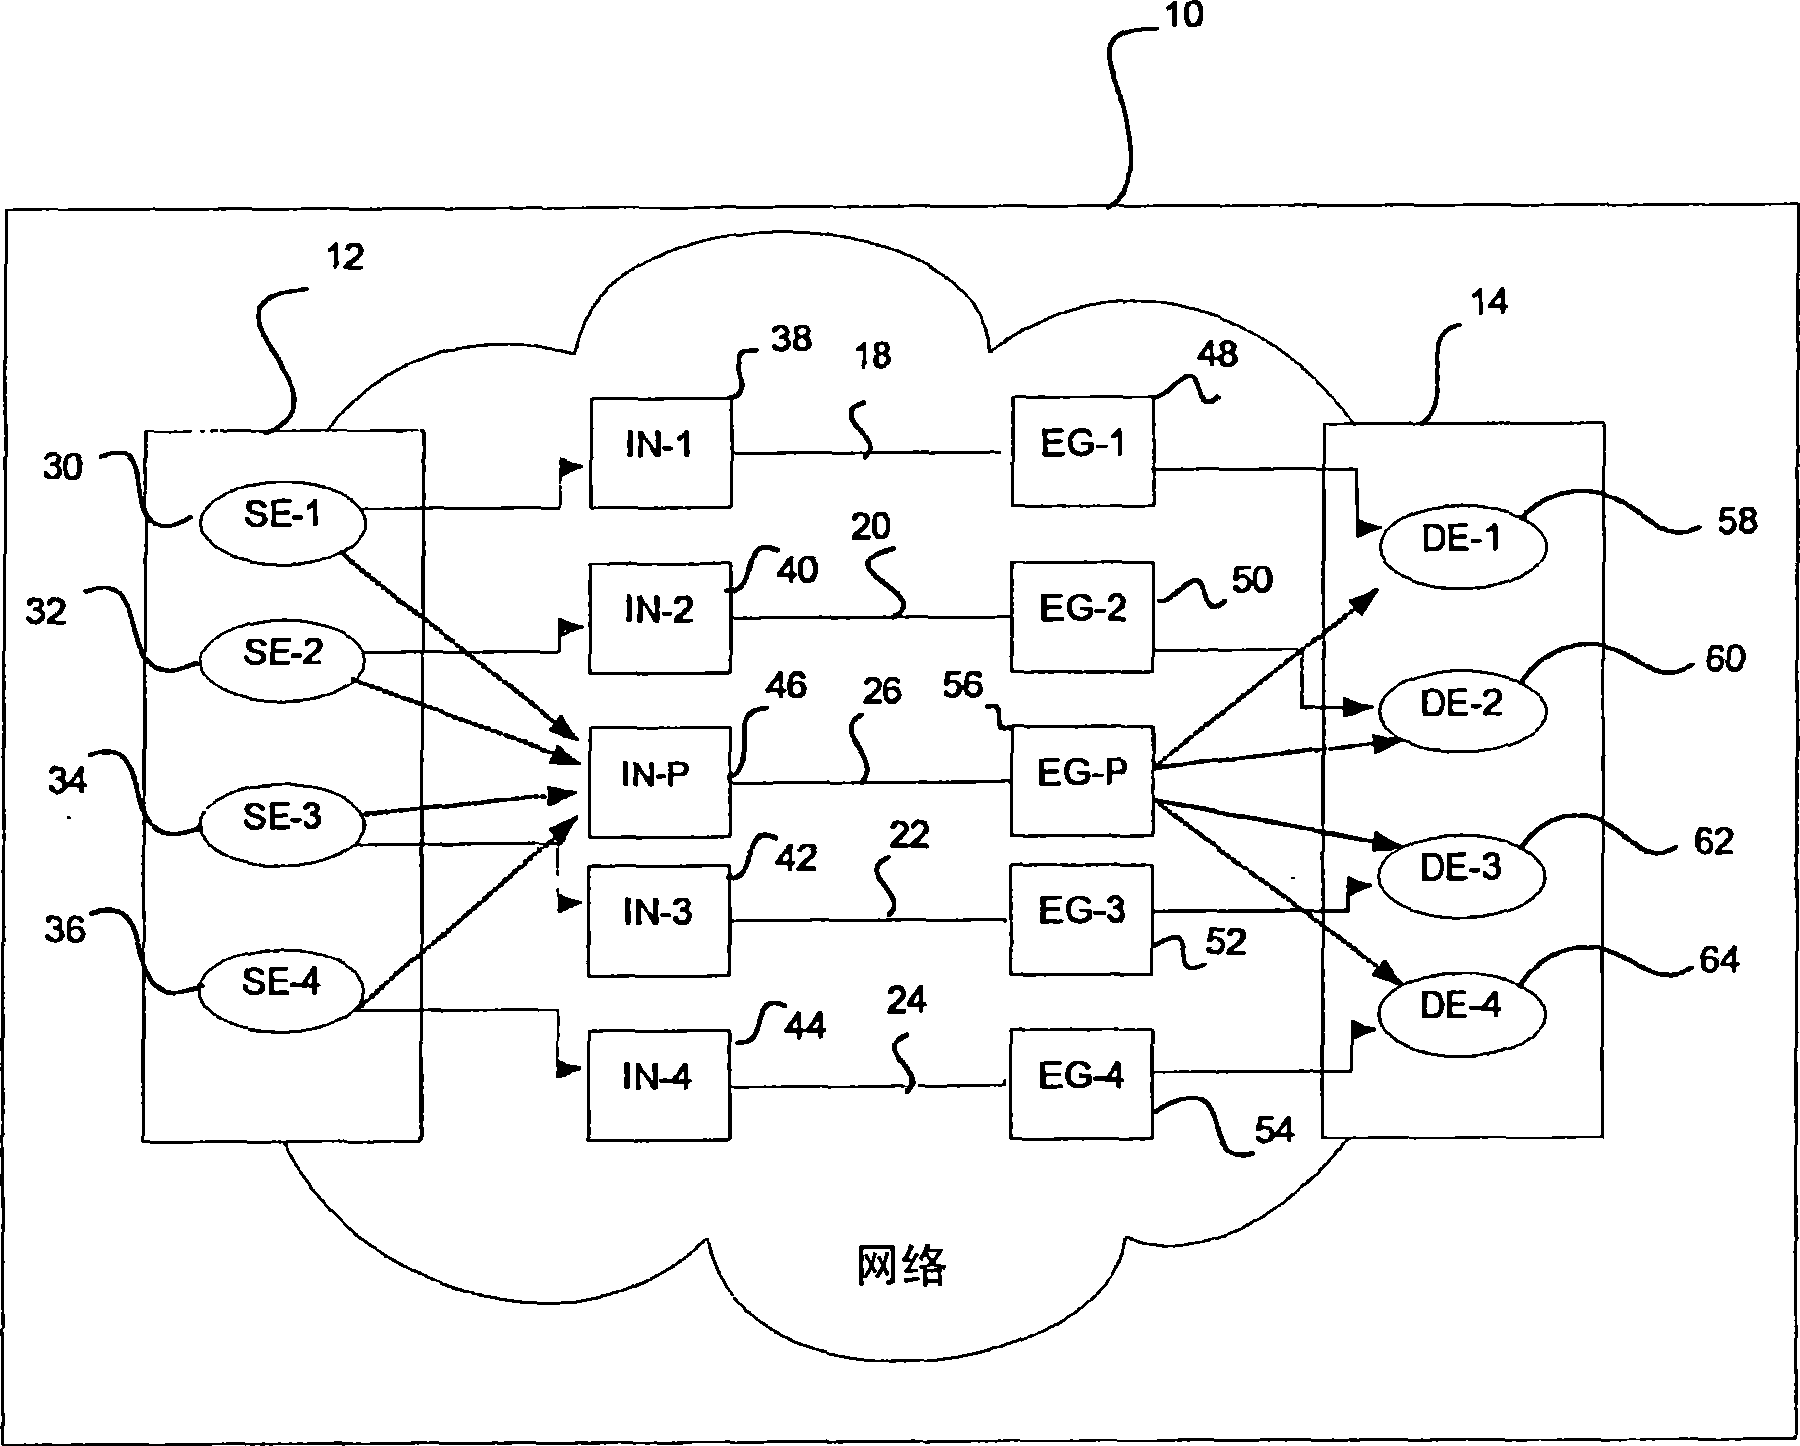 Faults propagation and protection for connection oriented data paths in packet networks